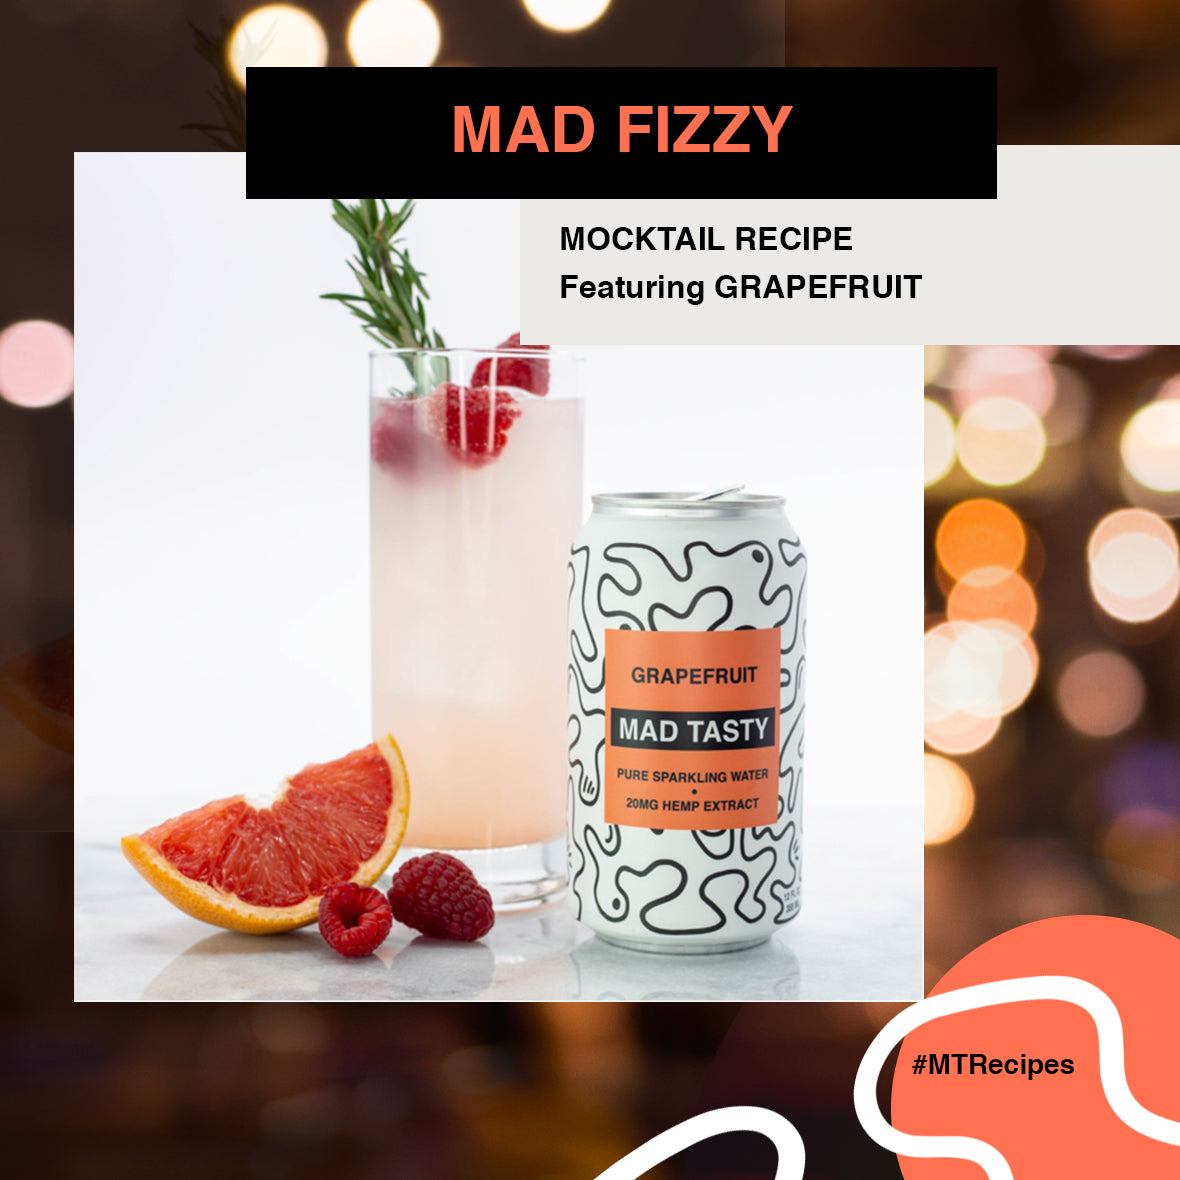 MAD FIZZY